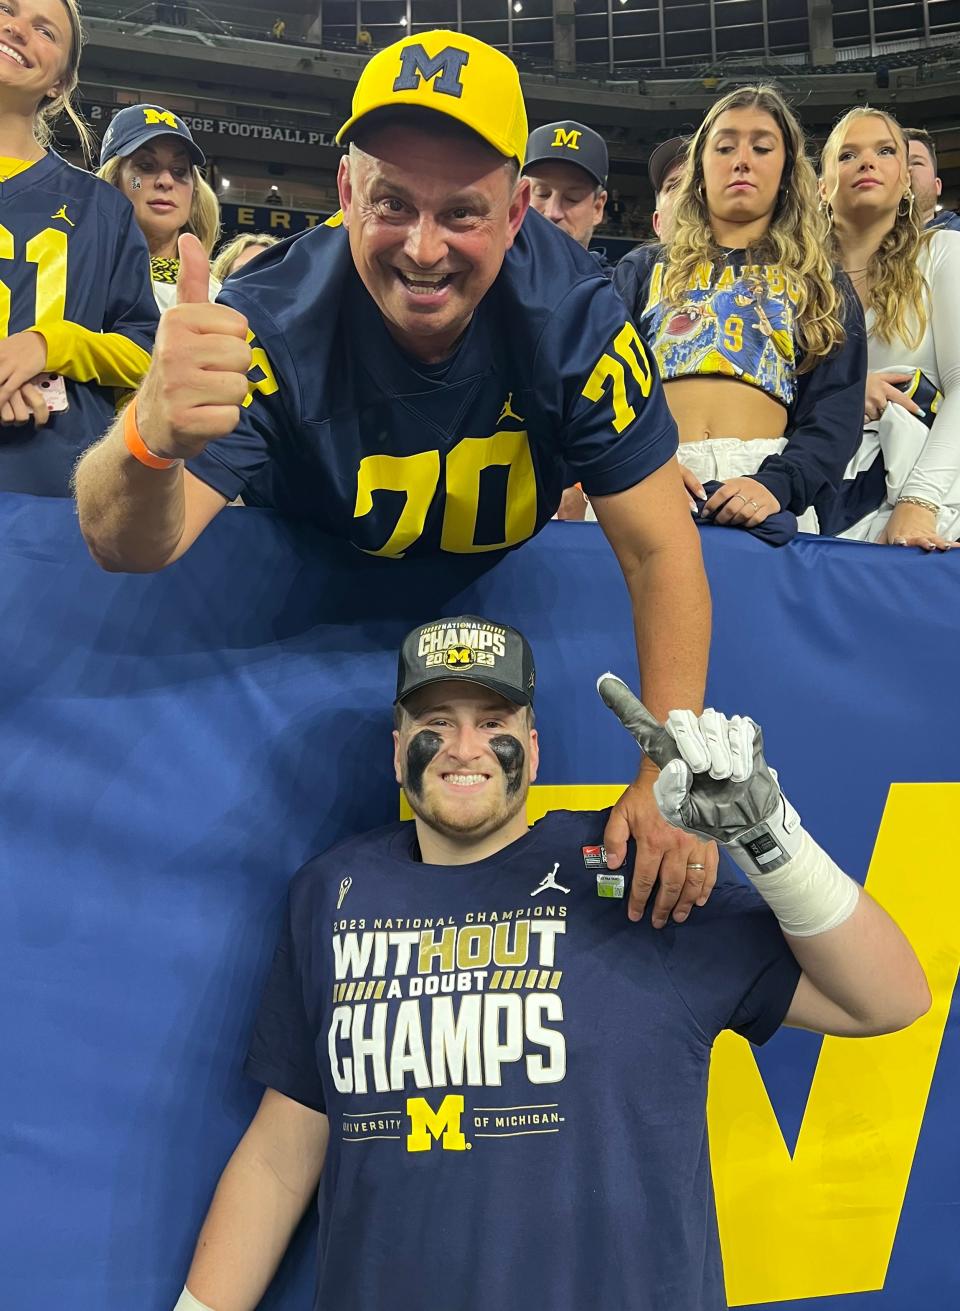 Peter Simmons Sr. celebrates with his son, Peter Simmons III, following Michigan's 34-13 win over No. 2 Washington in the CFP National Championship